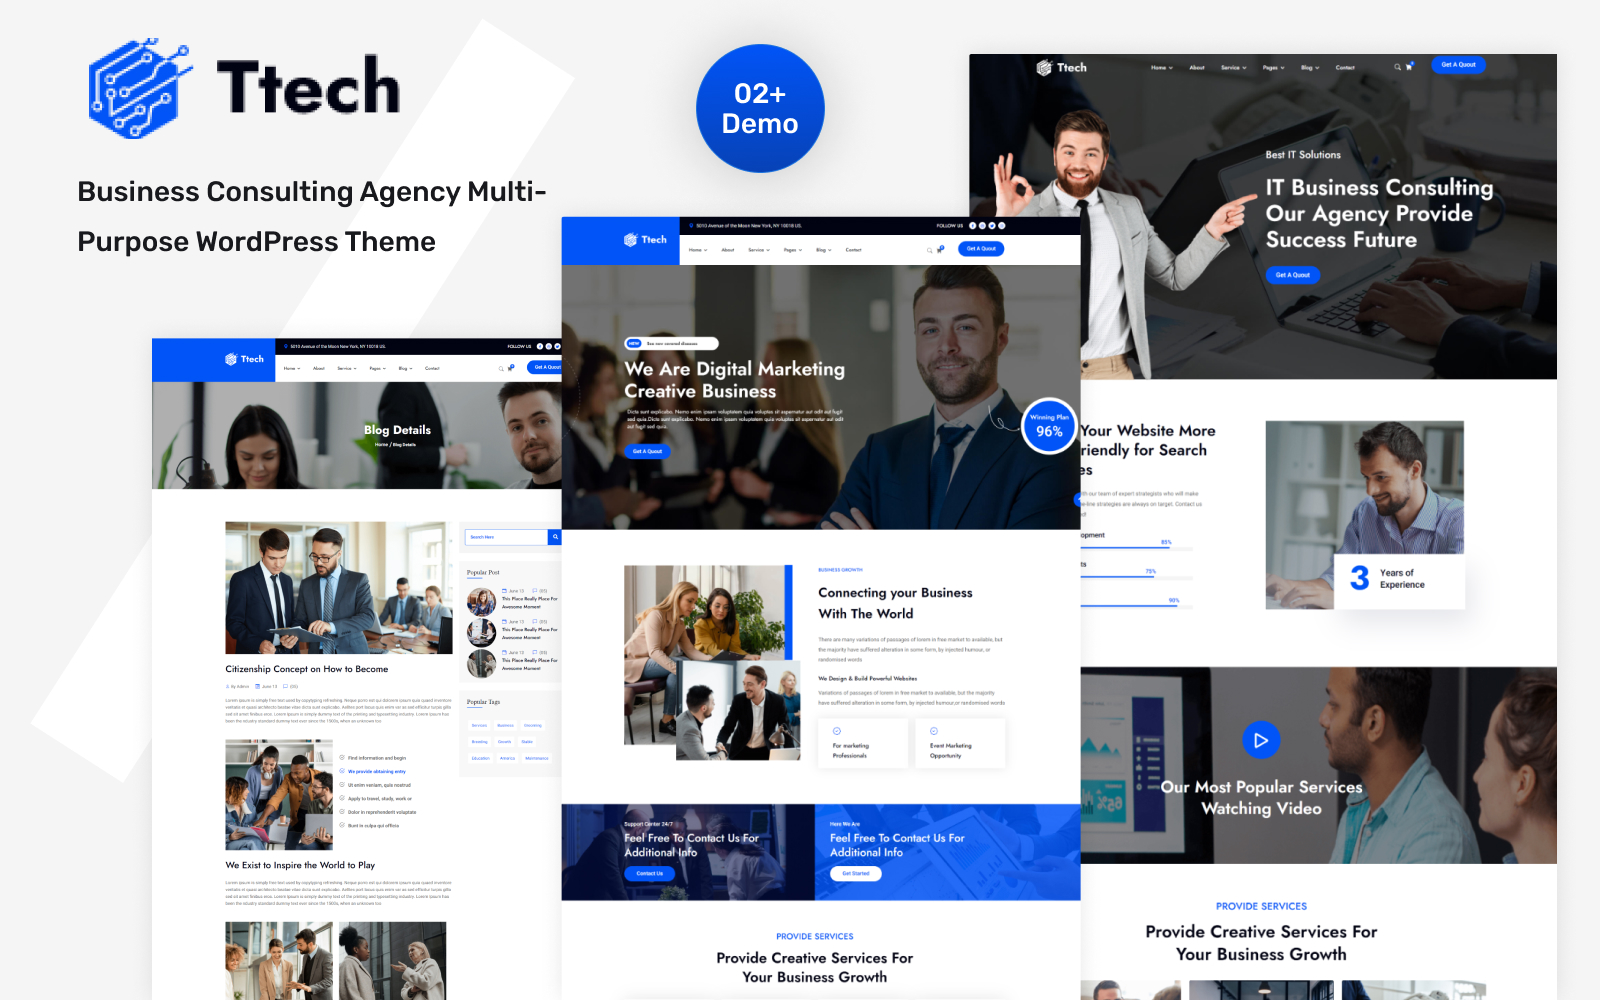 Ttech-Business Consulting Agency WordPress Theme